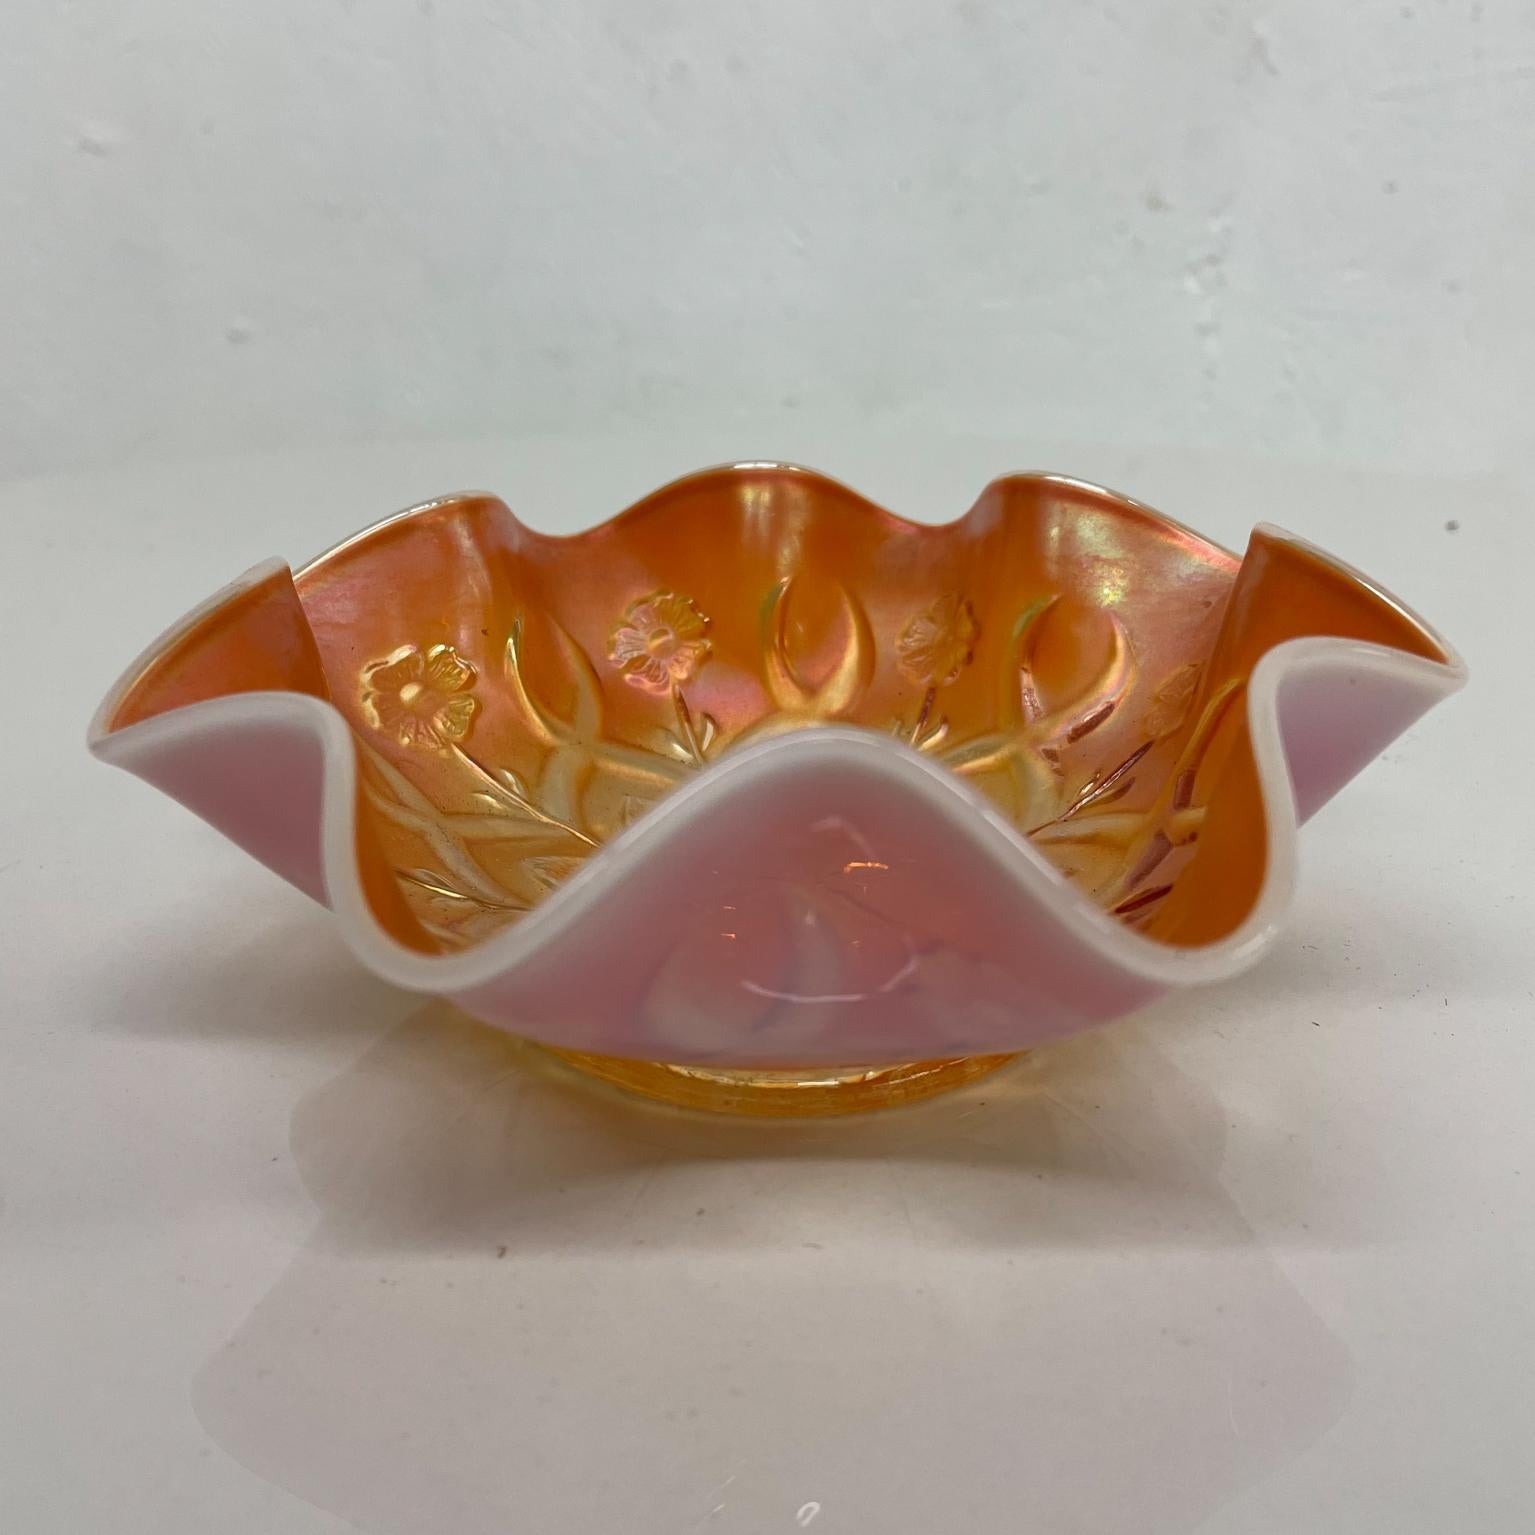 Art glass dish
Fenton Marigold holly carnival art glass dish candy compote server
Measures: 5.75 diameter x 2 height inches
Preowned original unrestored vintage condition.
Review images.

